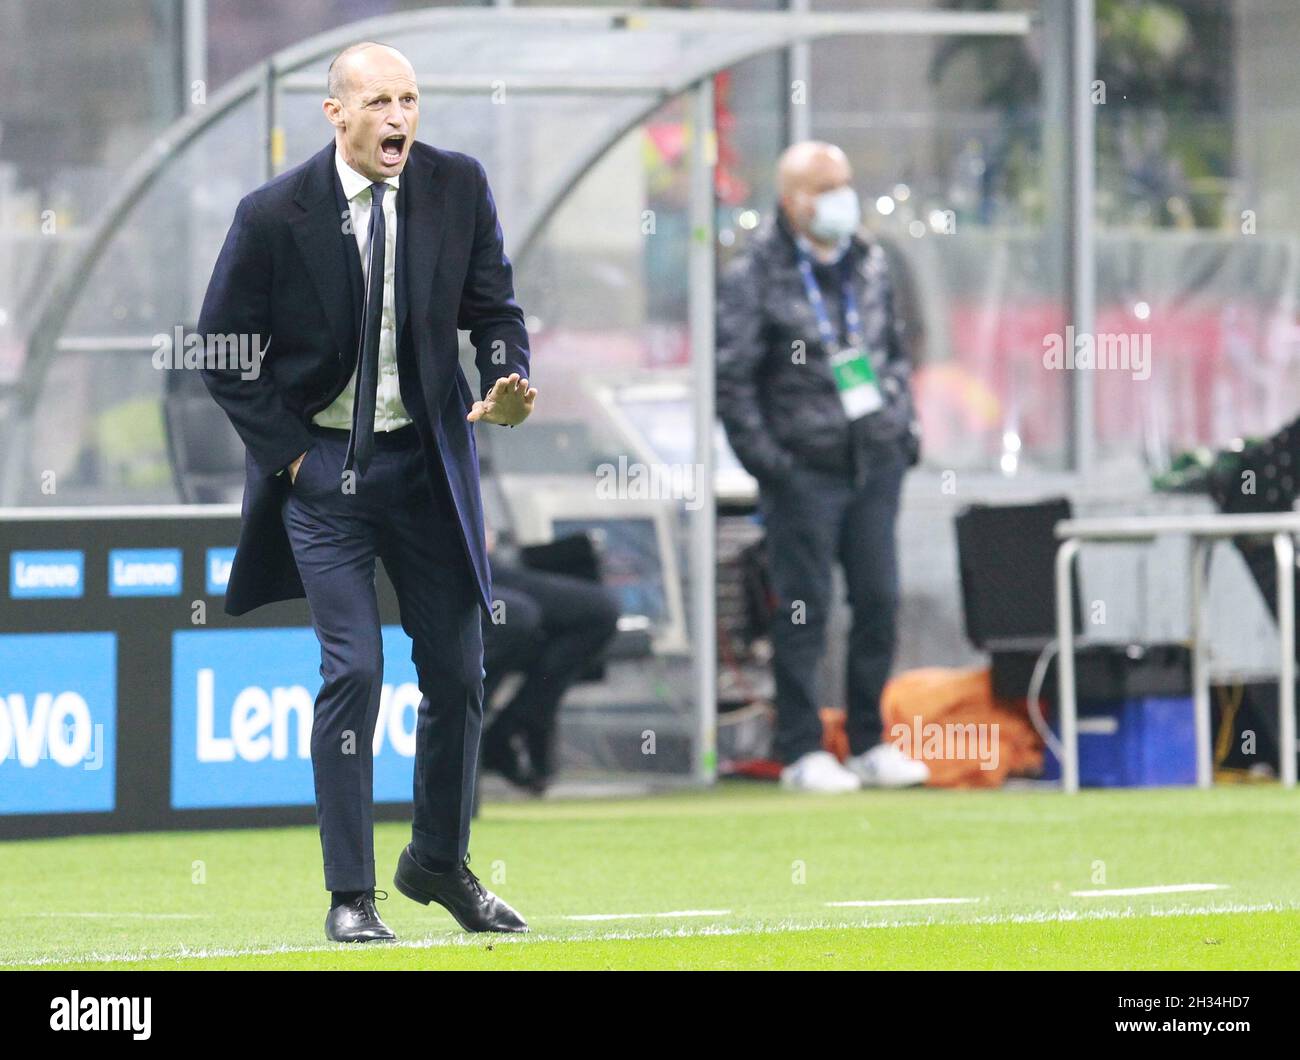 MILAN ITALY- October 24 Stadio G Meazza  Massimiliano Allegri during the Serie A match between Fc Inter and Fc Juventus   at Stadio G. Meazza on October 24, 2021 in Milan, Italy. Stock Photo